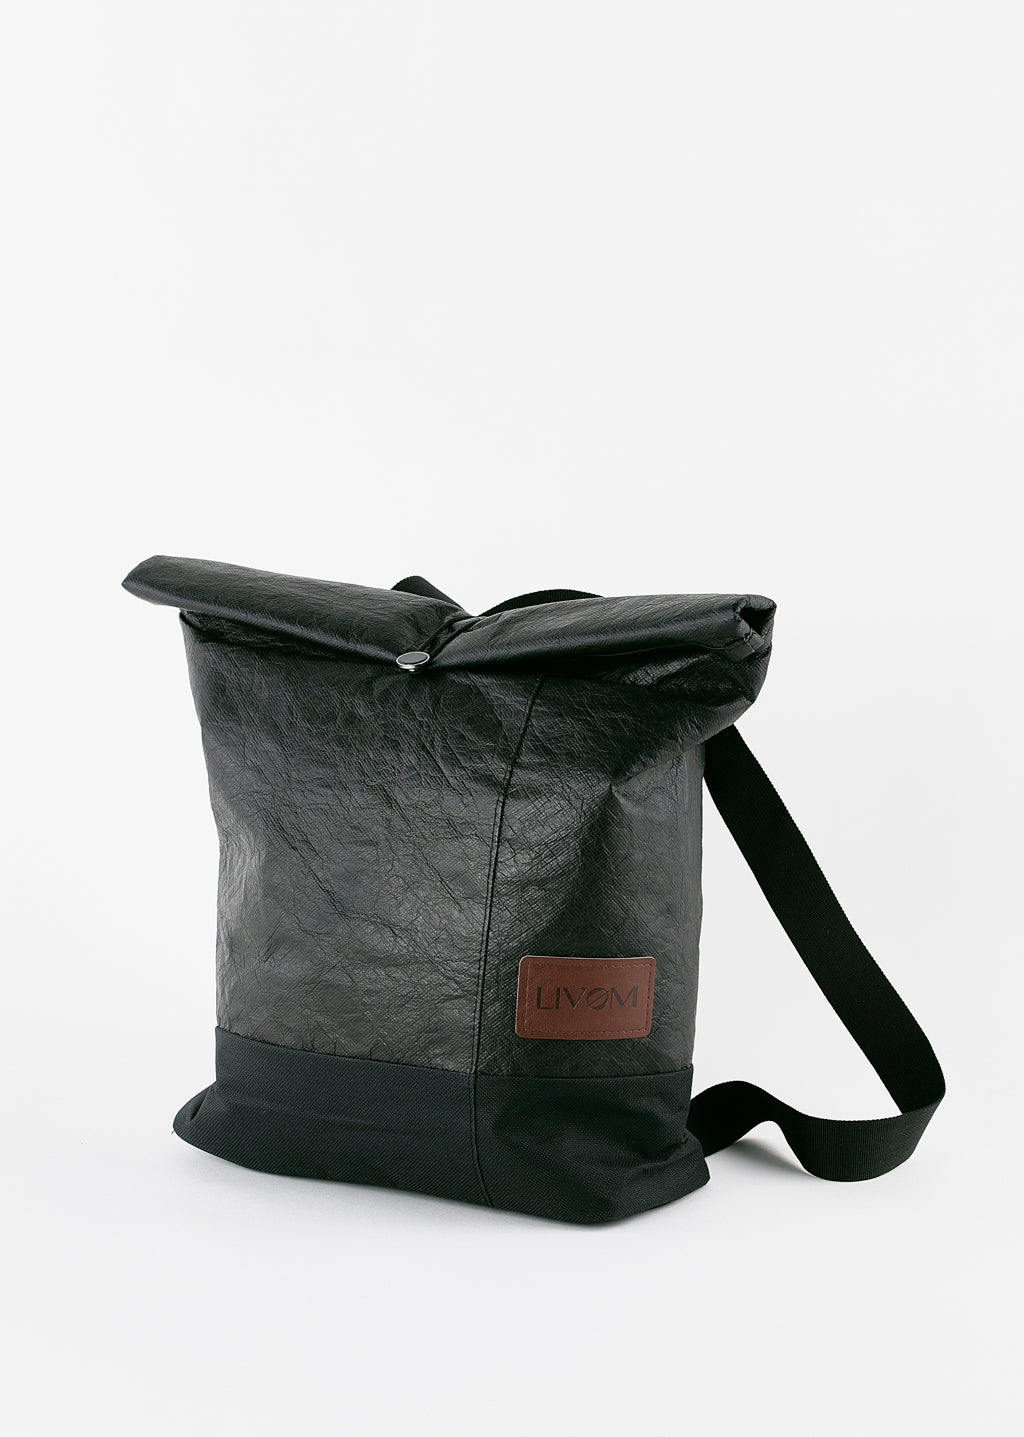 Tyveck Lunch Bag